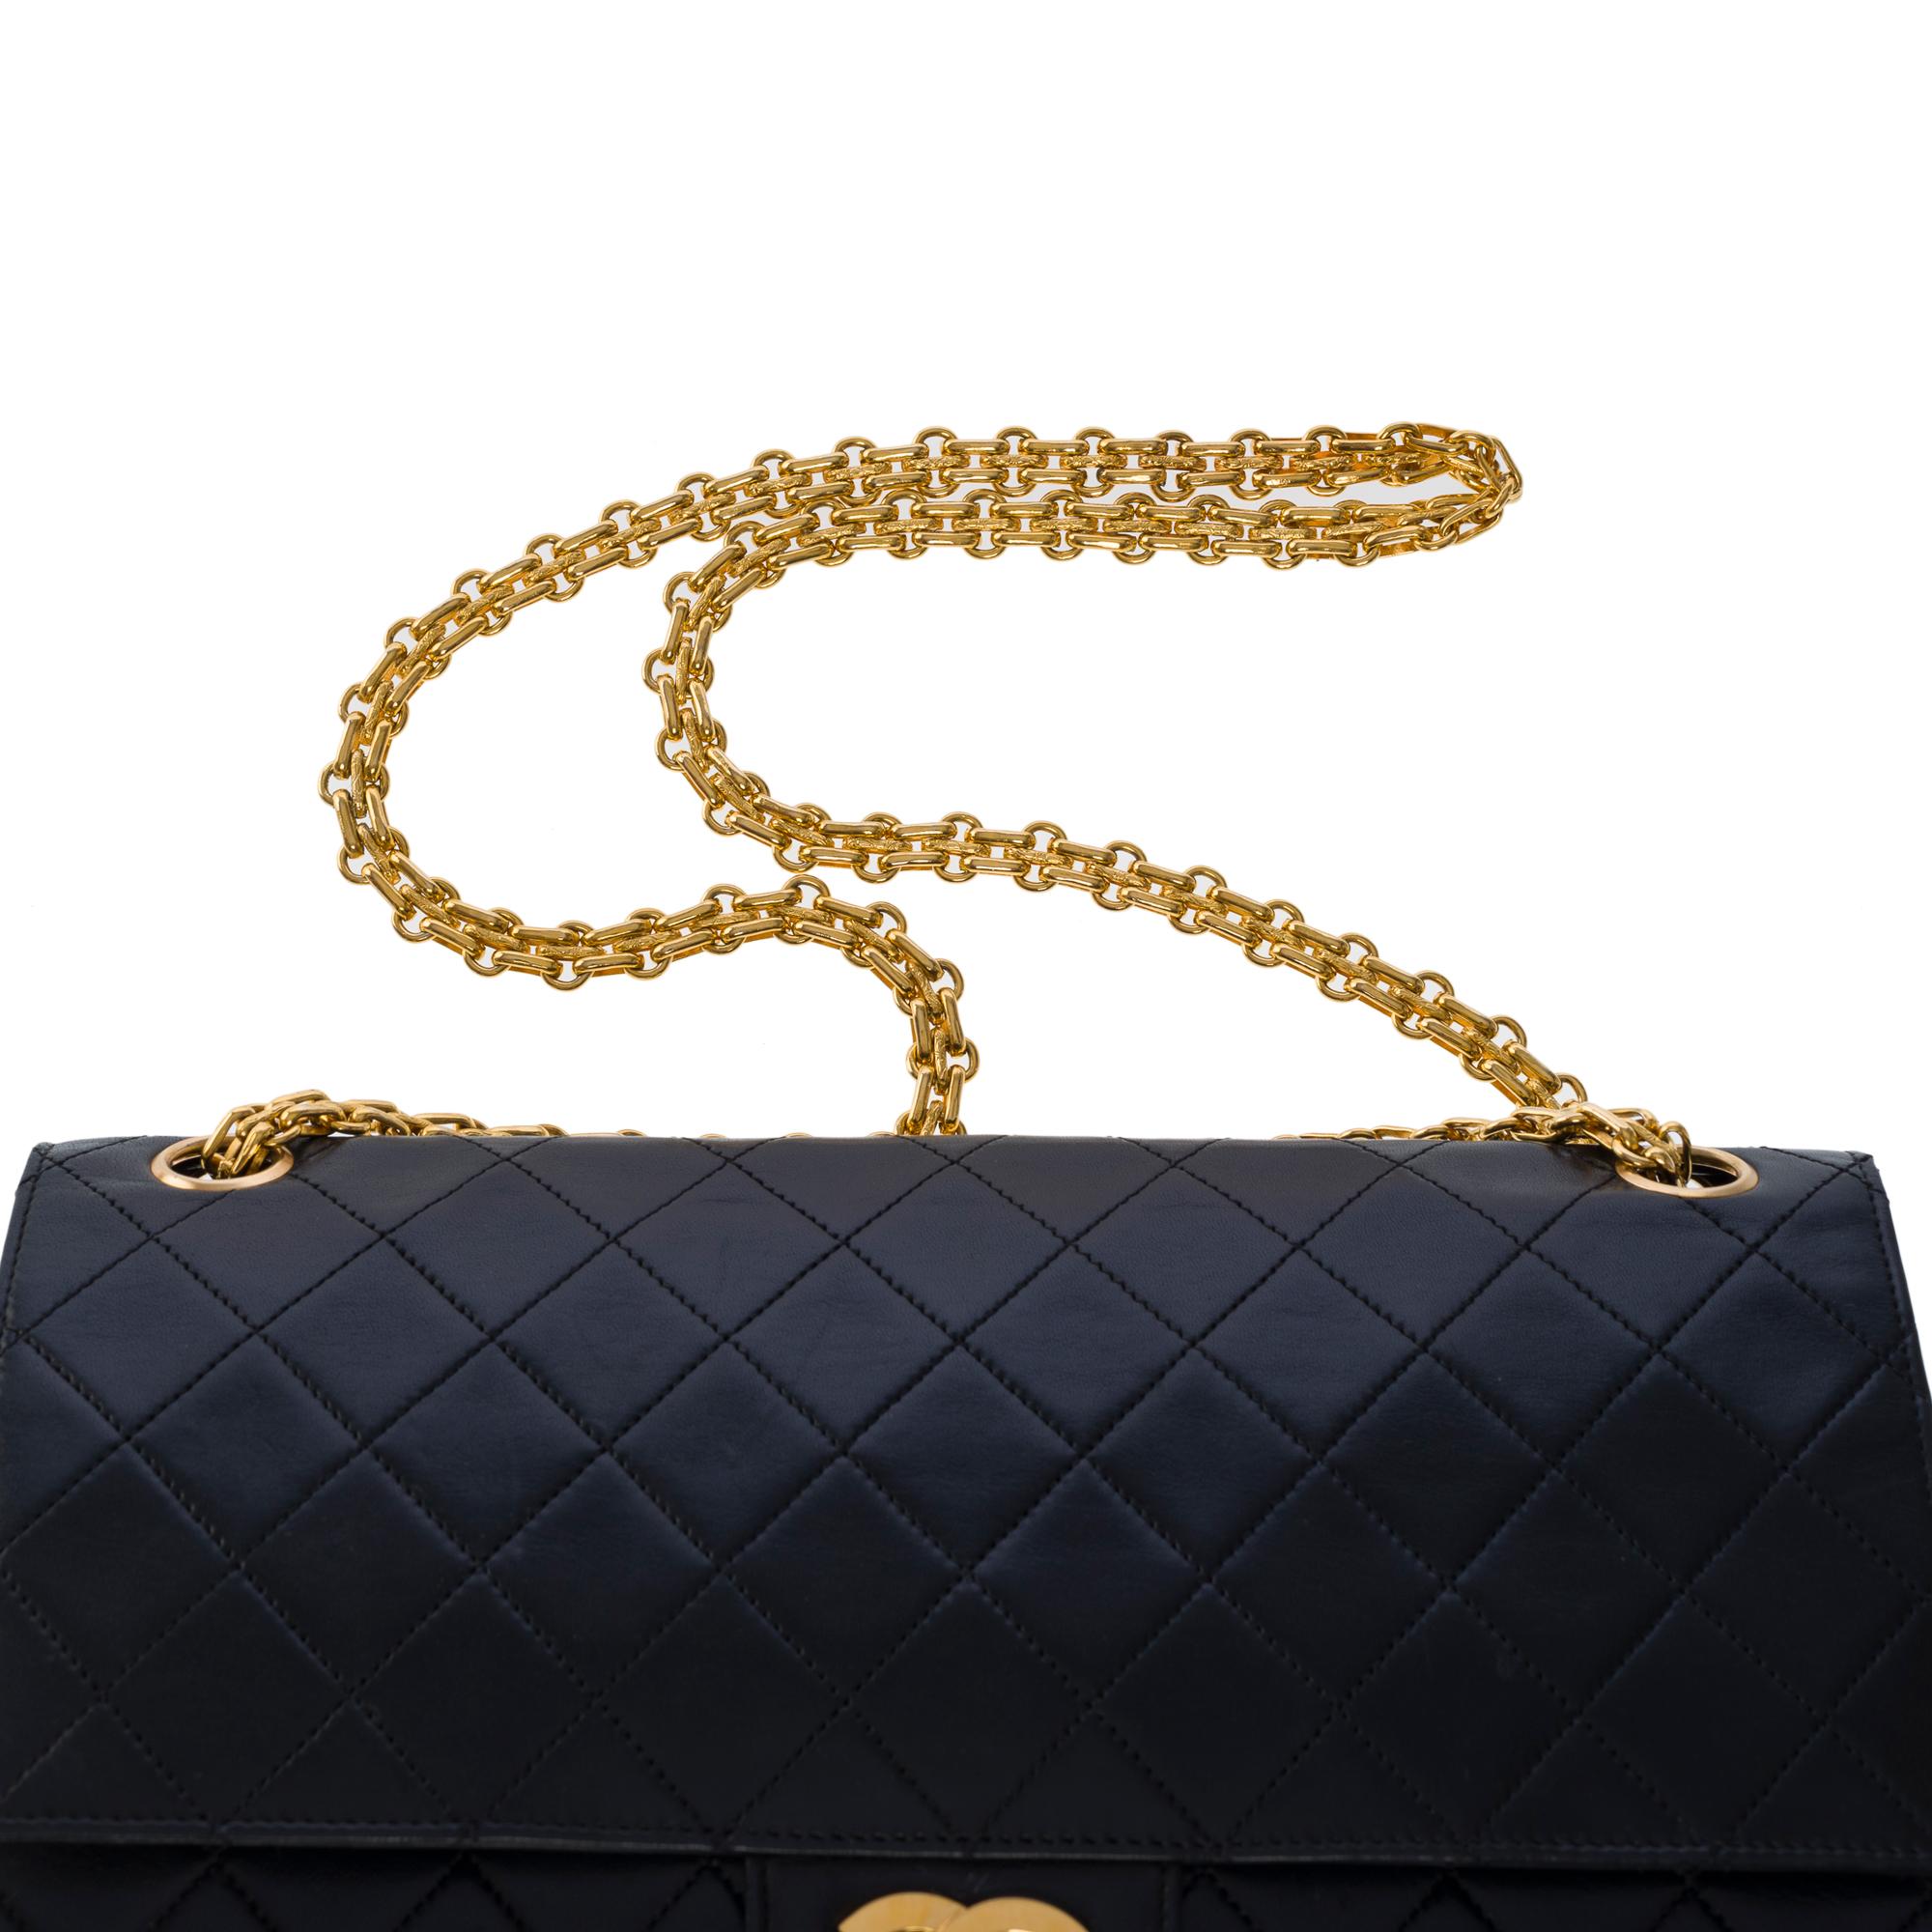 Chanel Timeless/Classic double flap shoulder bag in black quilted lambskin, GHW 5